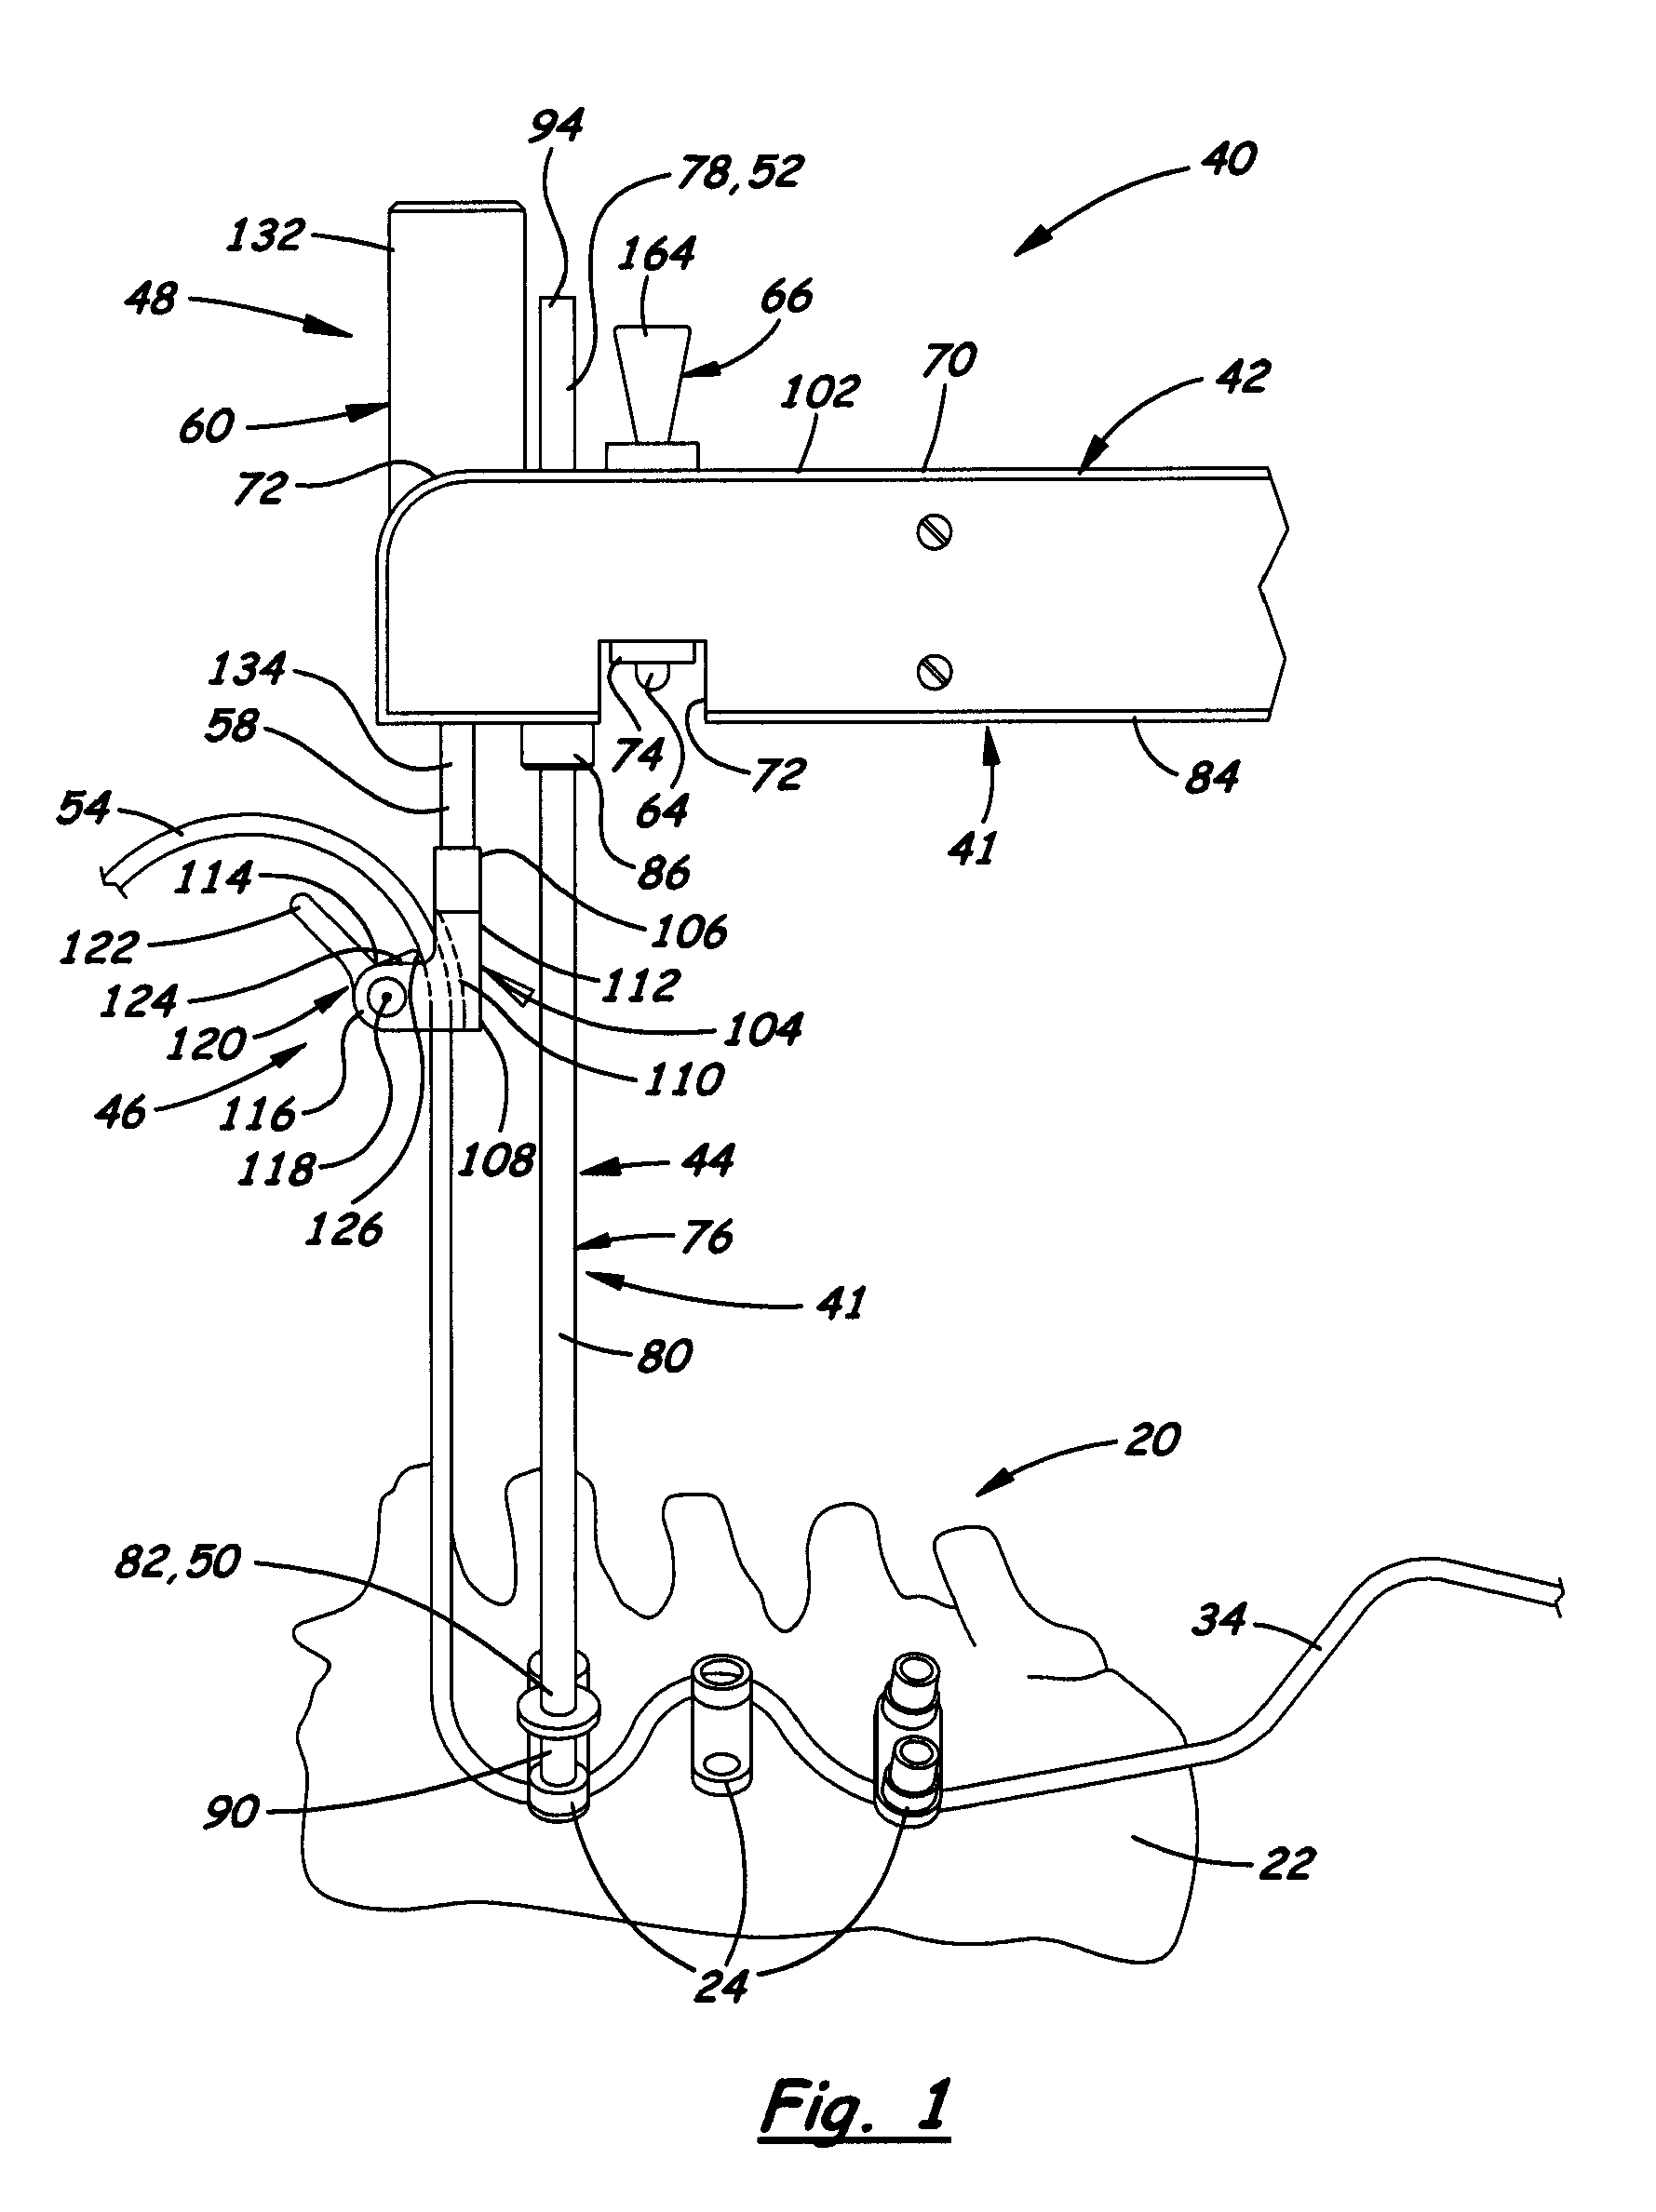 Apparatus and method for applying sustained tension on a tether